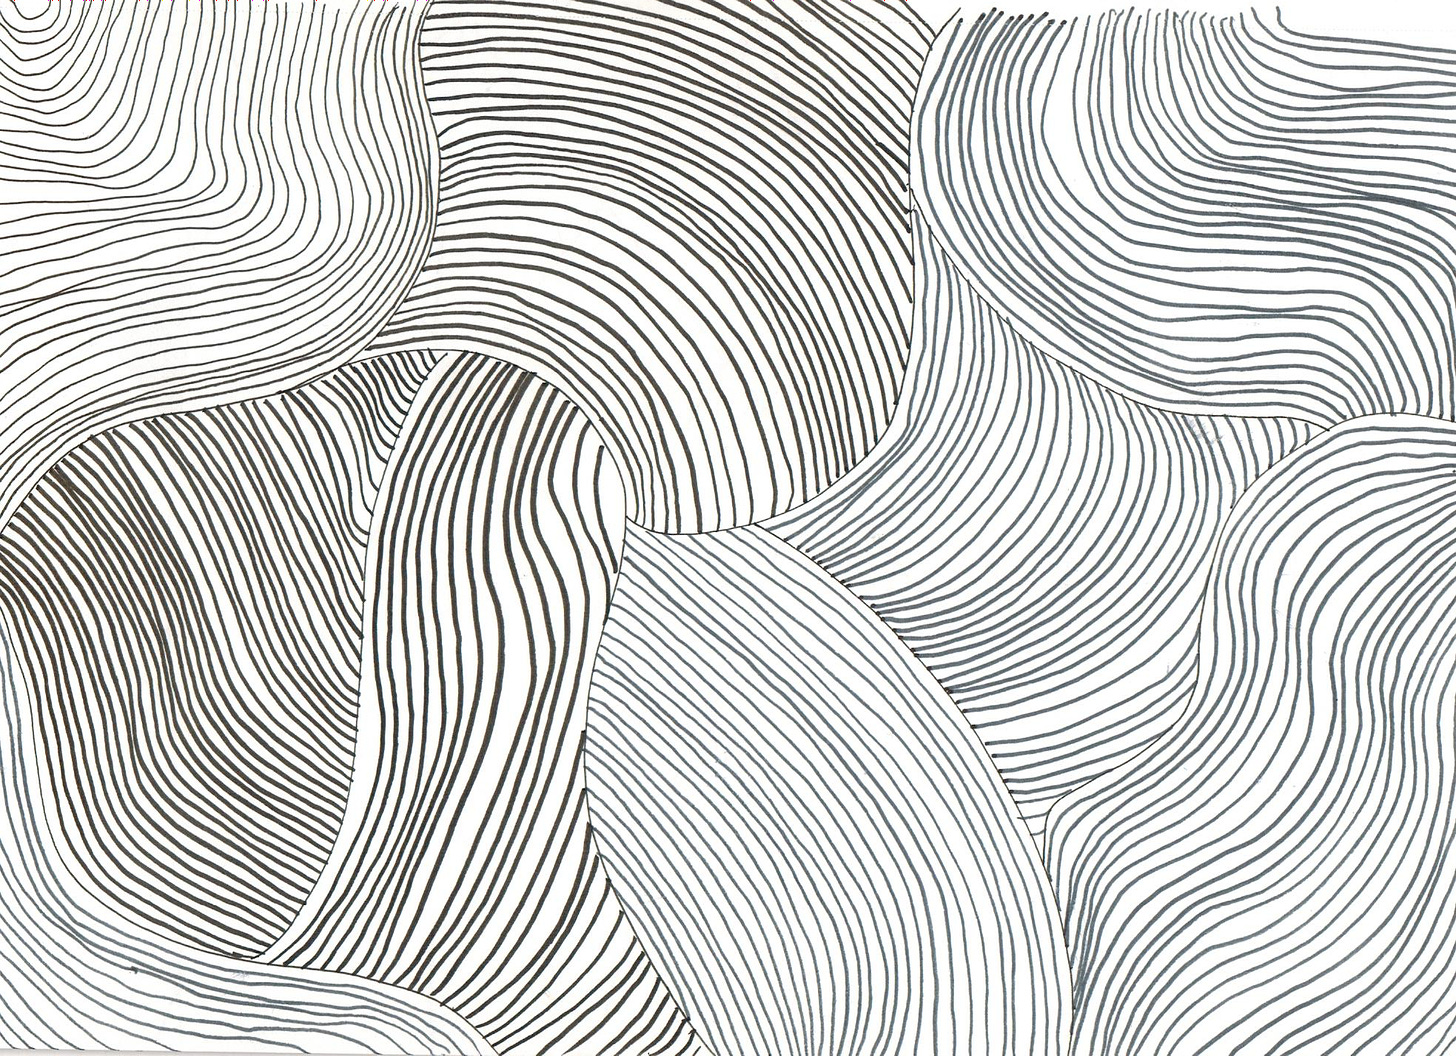 Swirl lines in ink. Black and white.